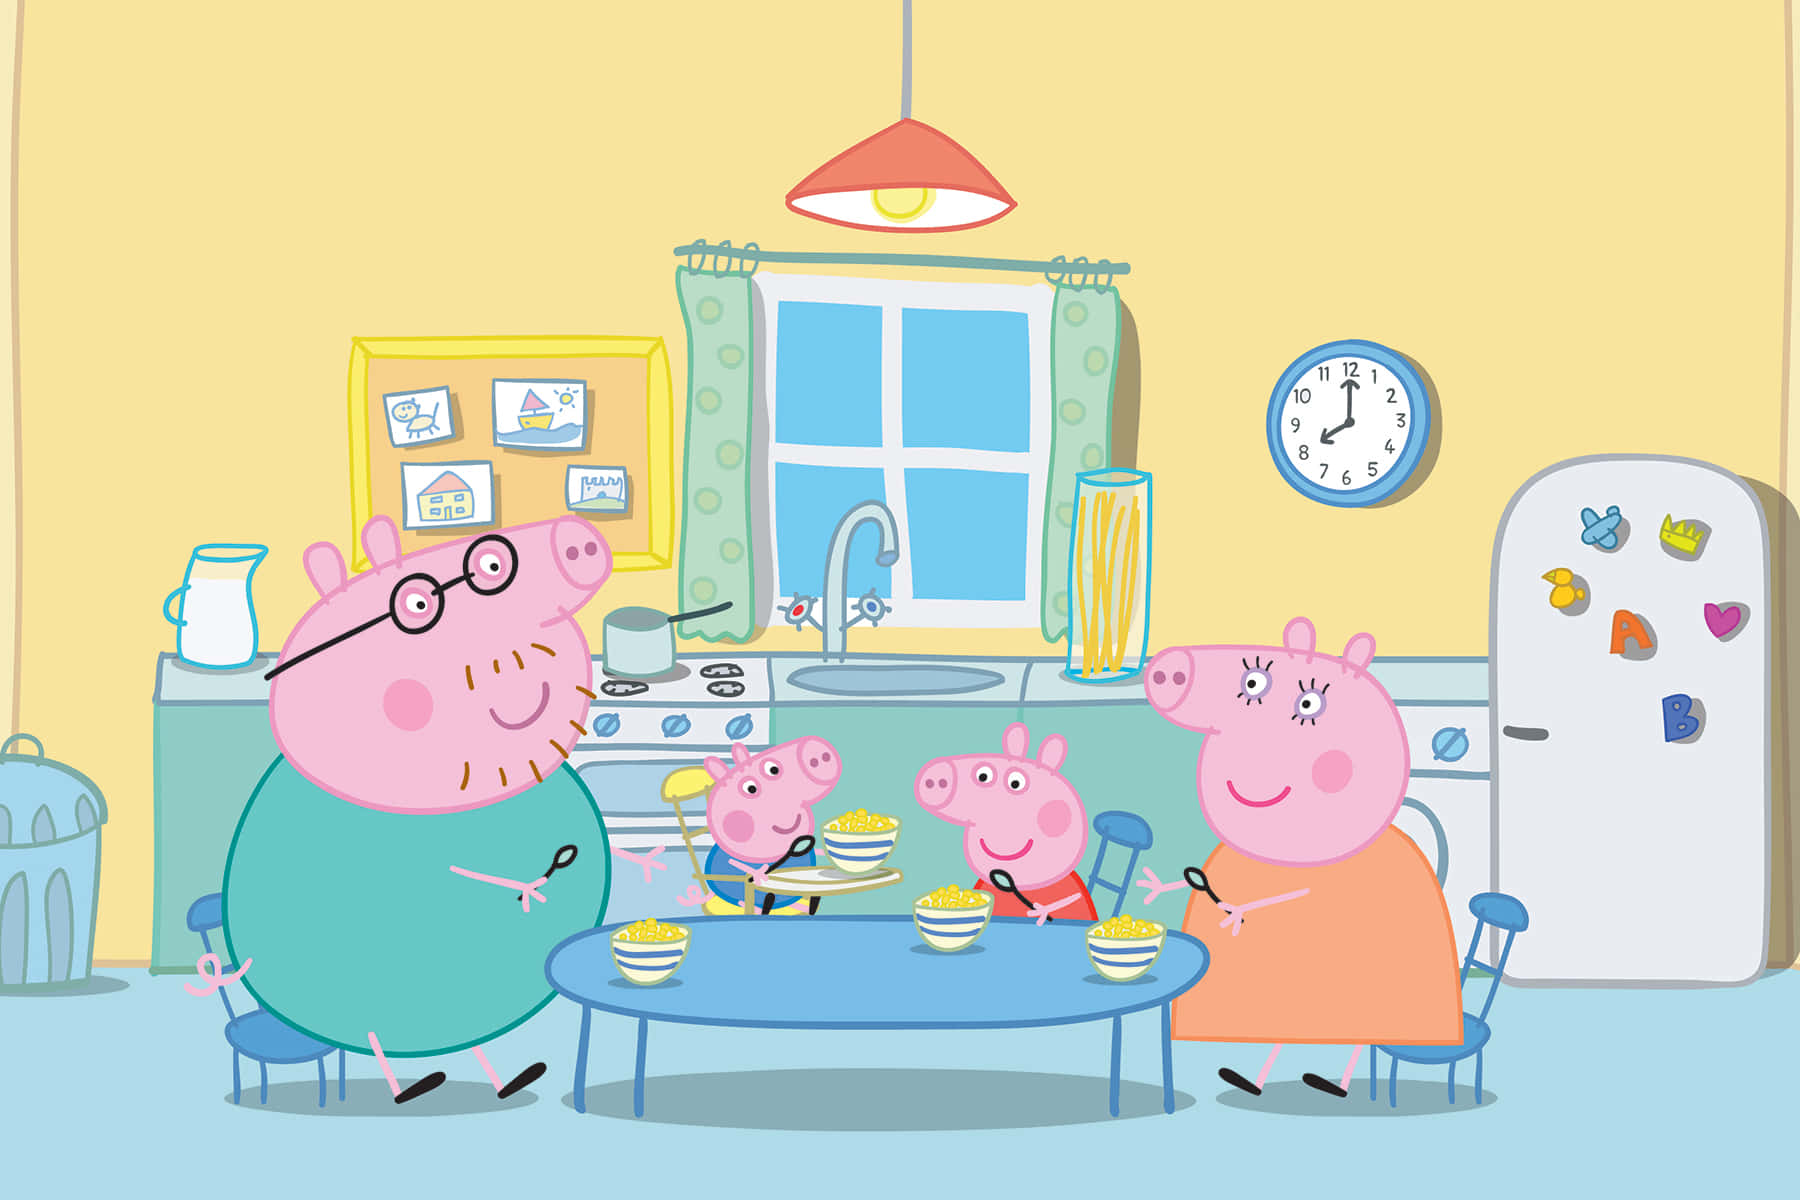 The Peppa Pig Family Is Ready For Fun!